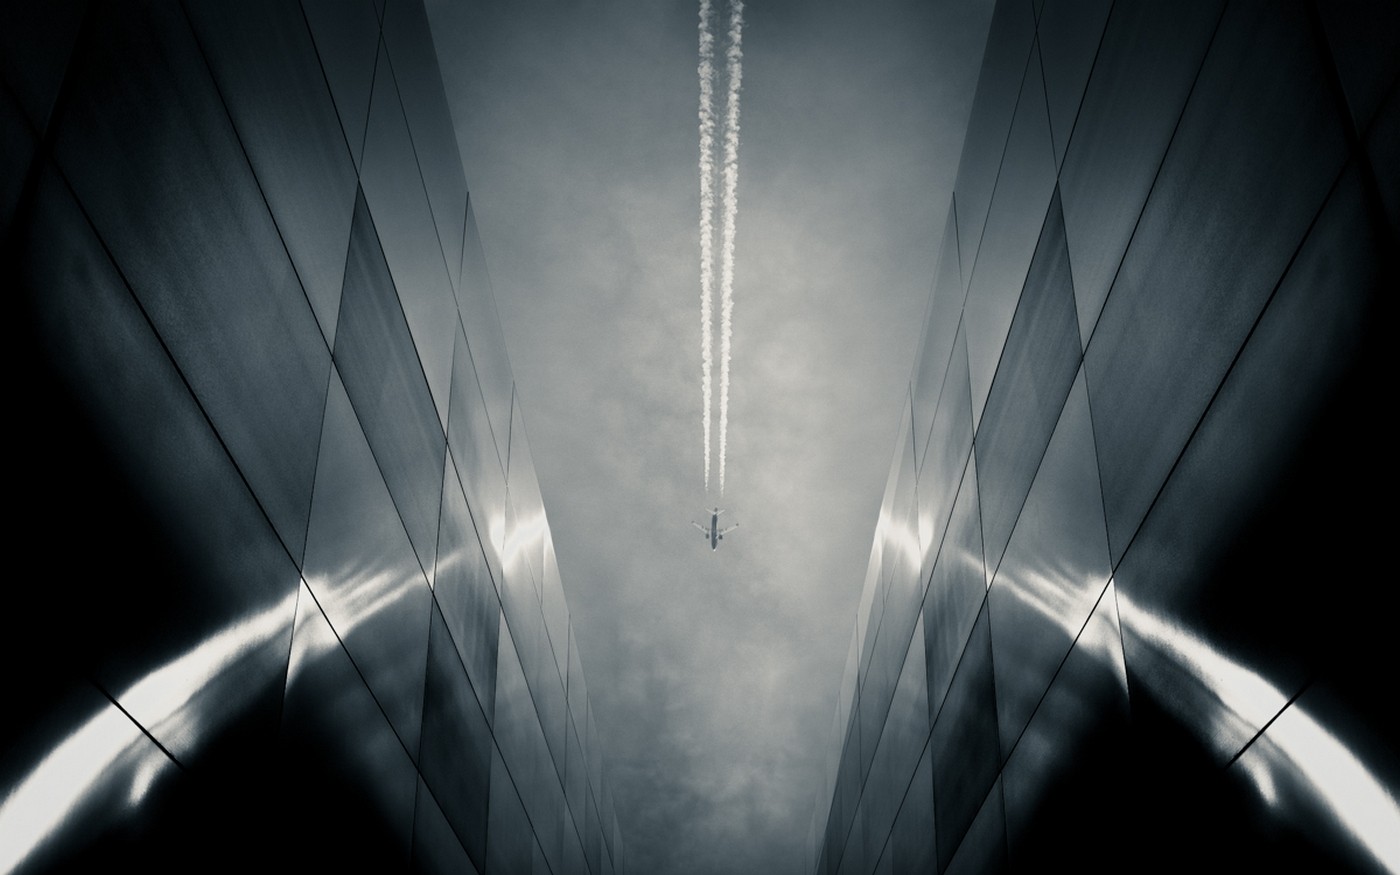 General 1400x875 landscape urban architecture airplane tracks building reflection monochrome low-angle vehicle